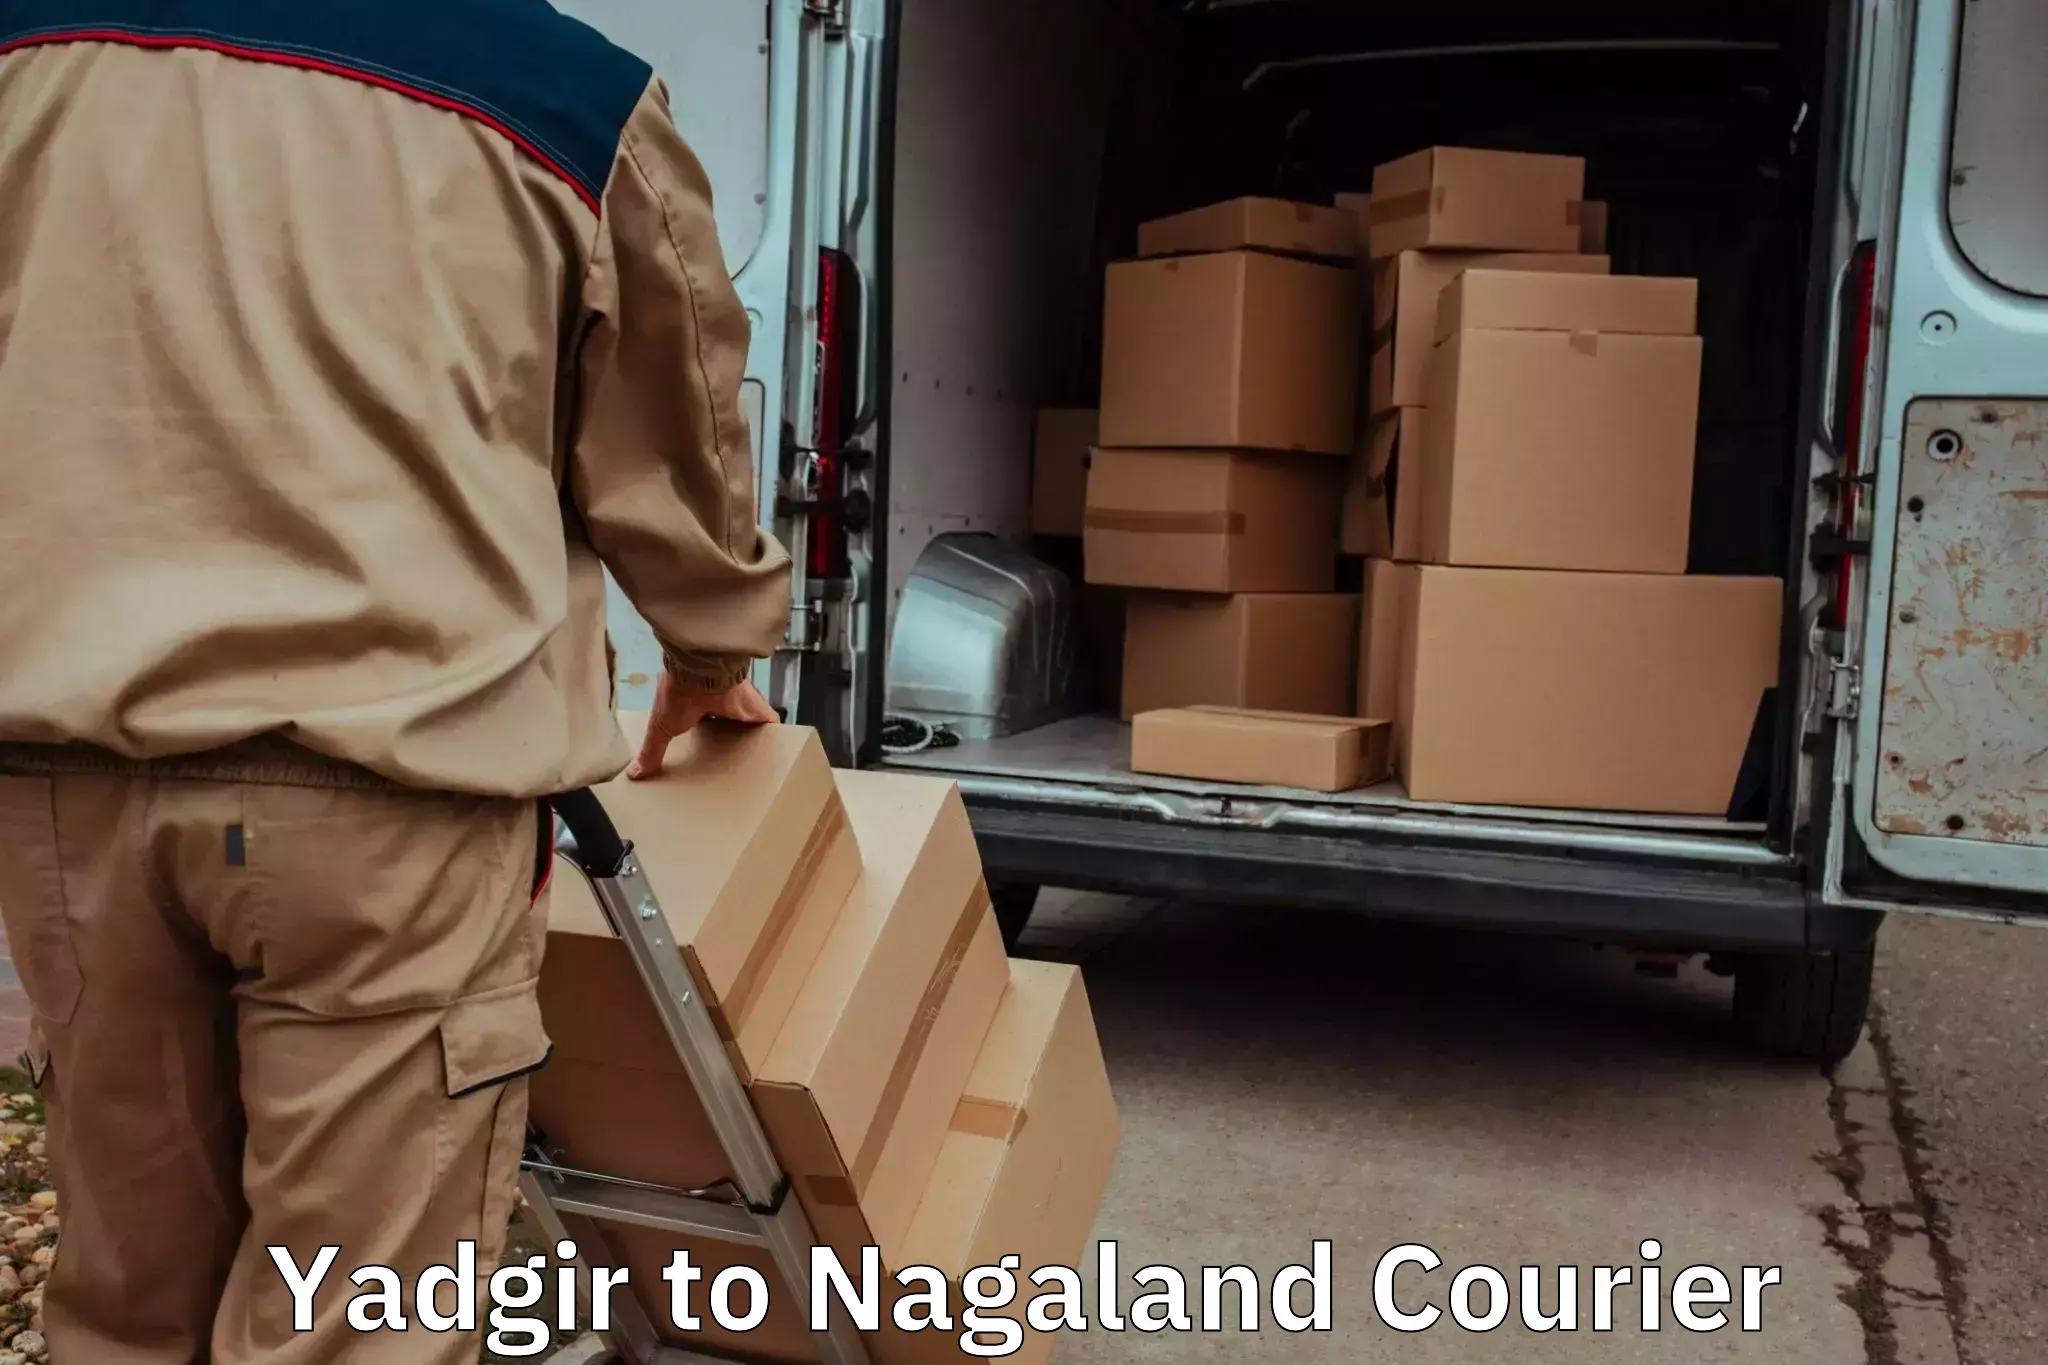 Full-service movers Yadgir to Nagaland